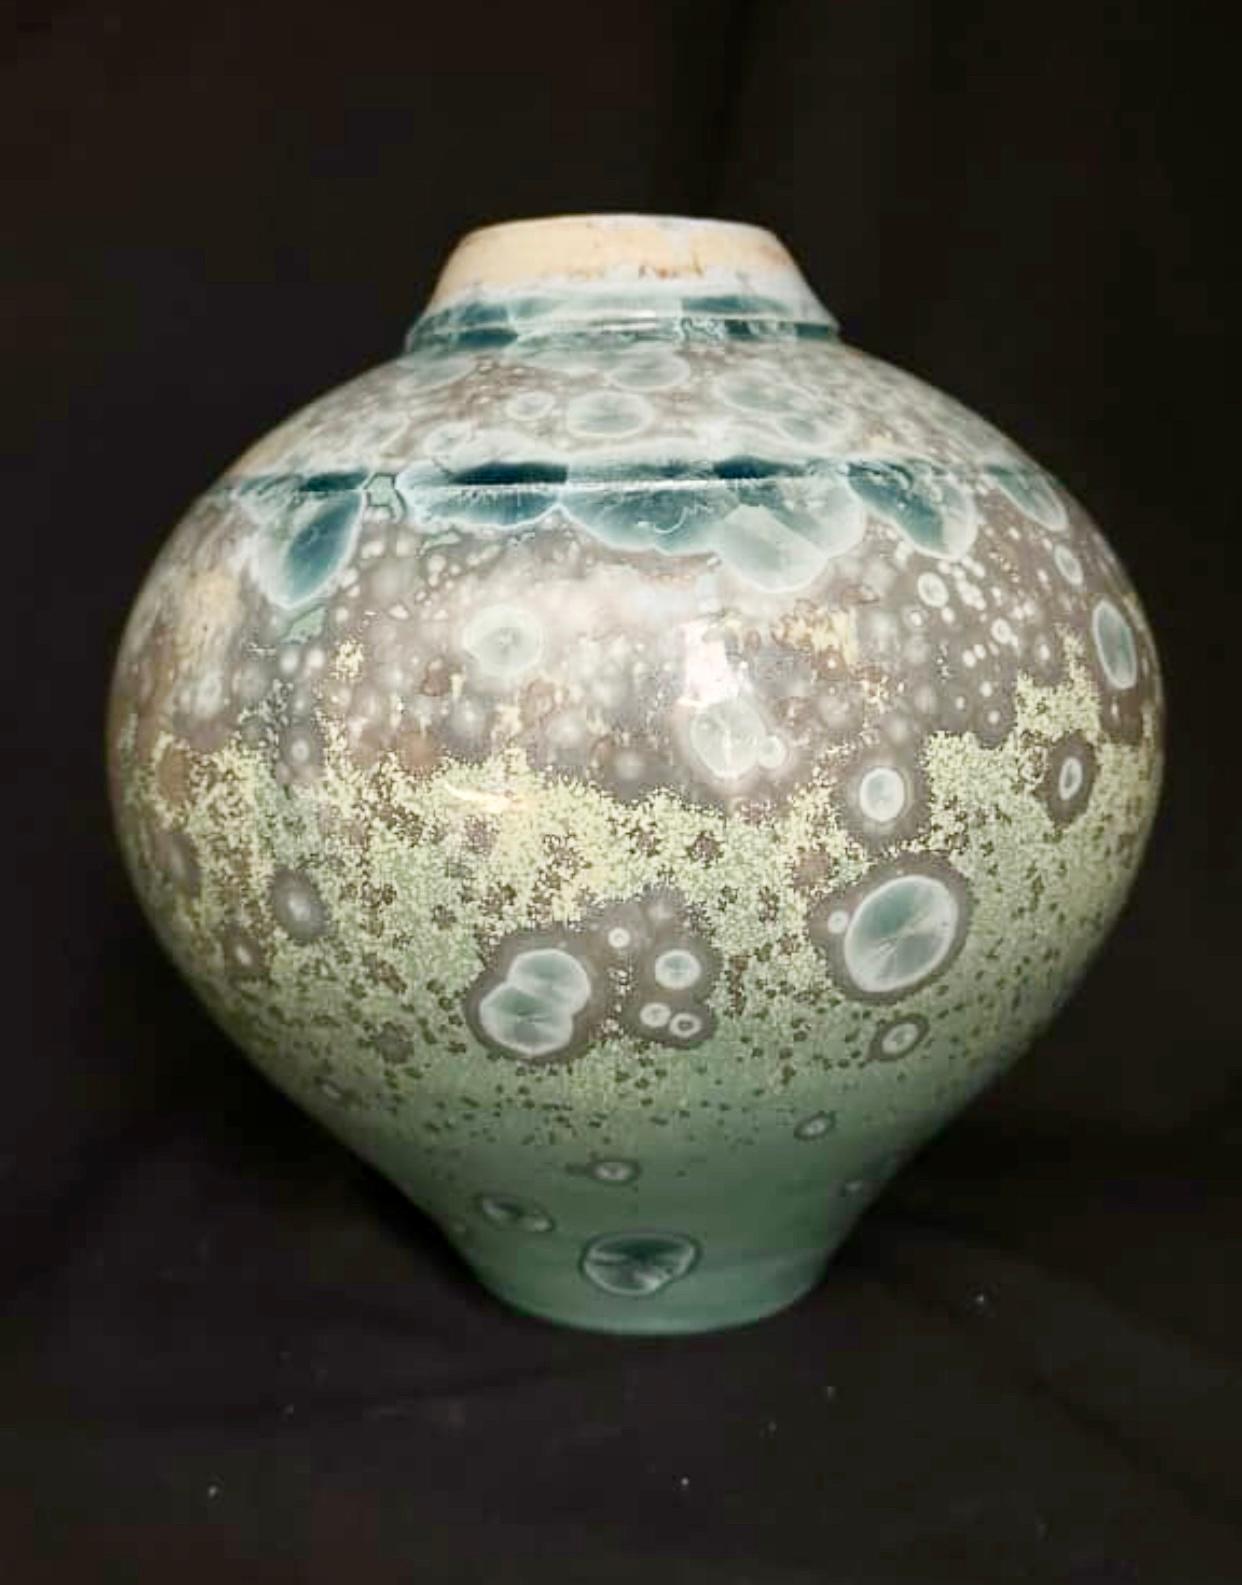 Porcelain vase by Australian ceramicist Anthony Conway, 1989. Conway began working as a potter or ceramicist in the early 1980s. This vase is uniquely finished in his signature crystalline glaze. The blue/green hues explode from the gray base color